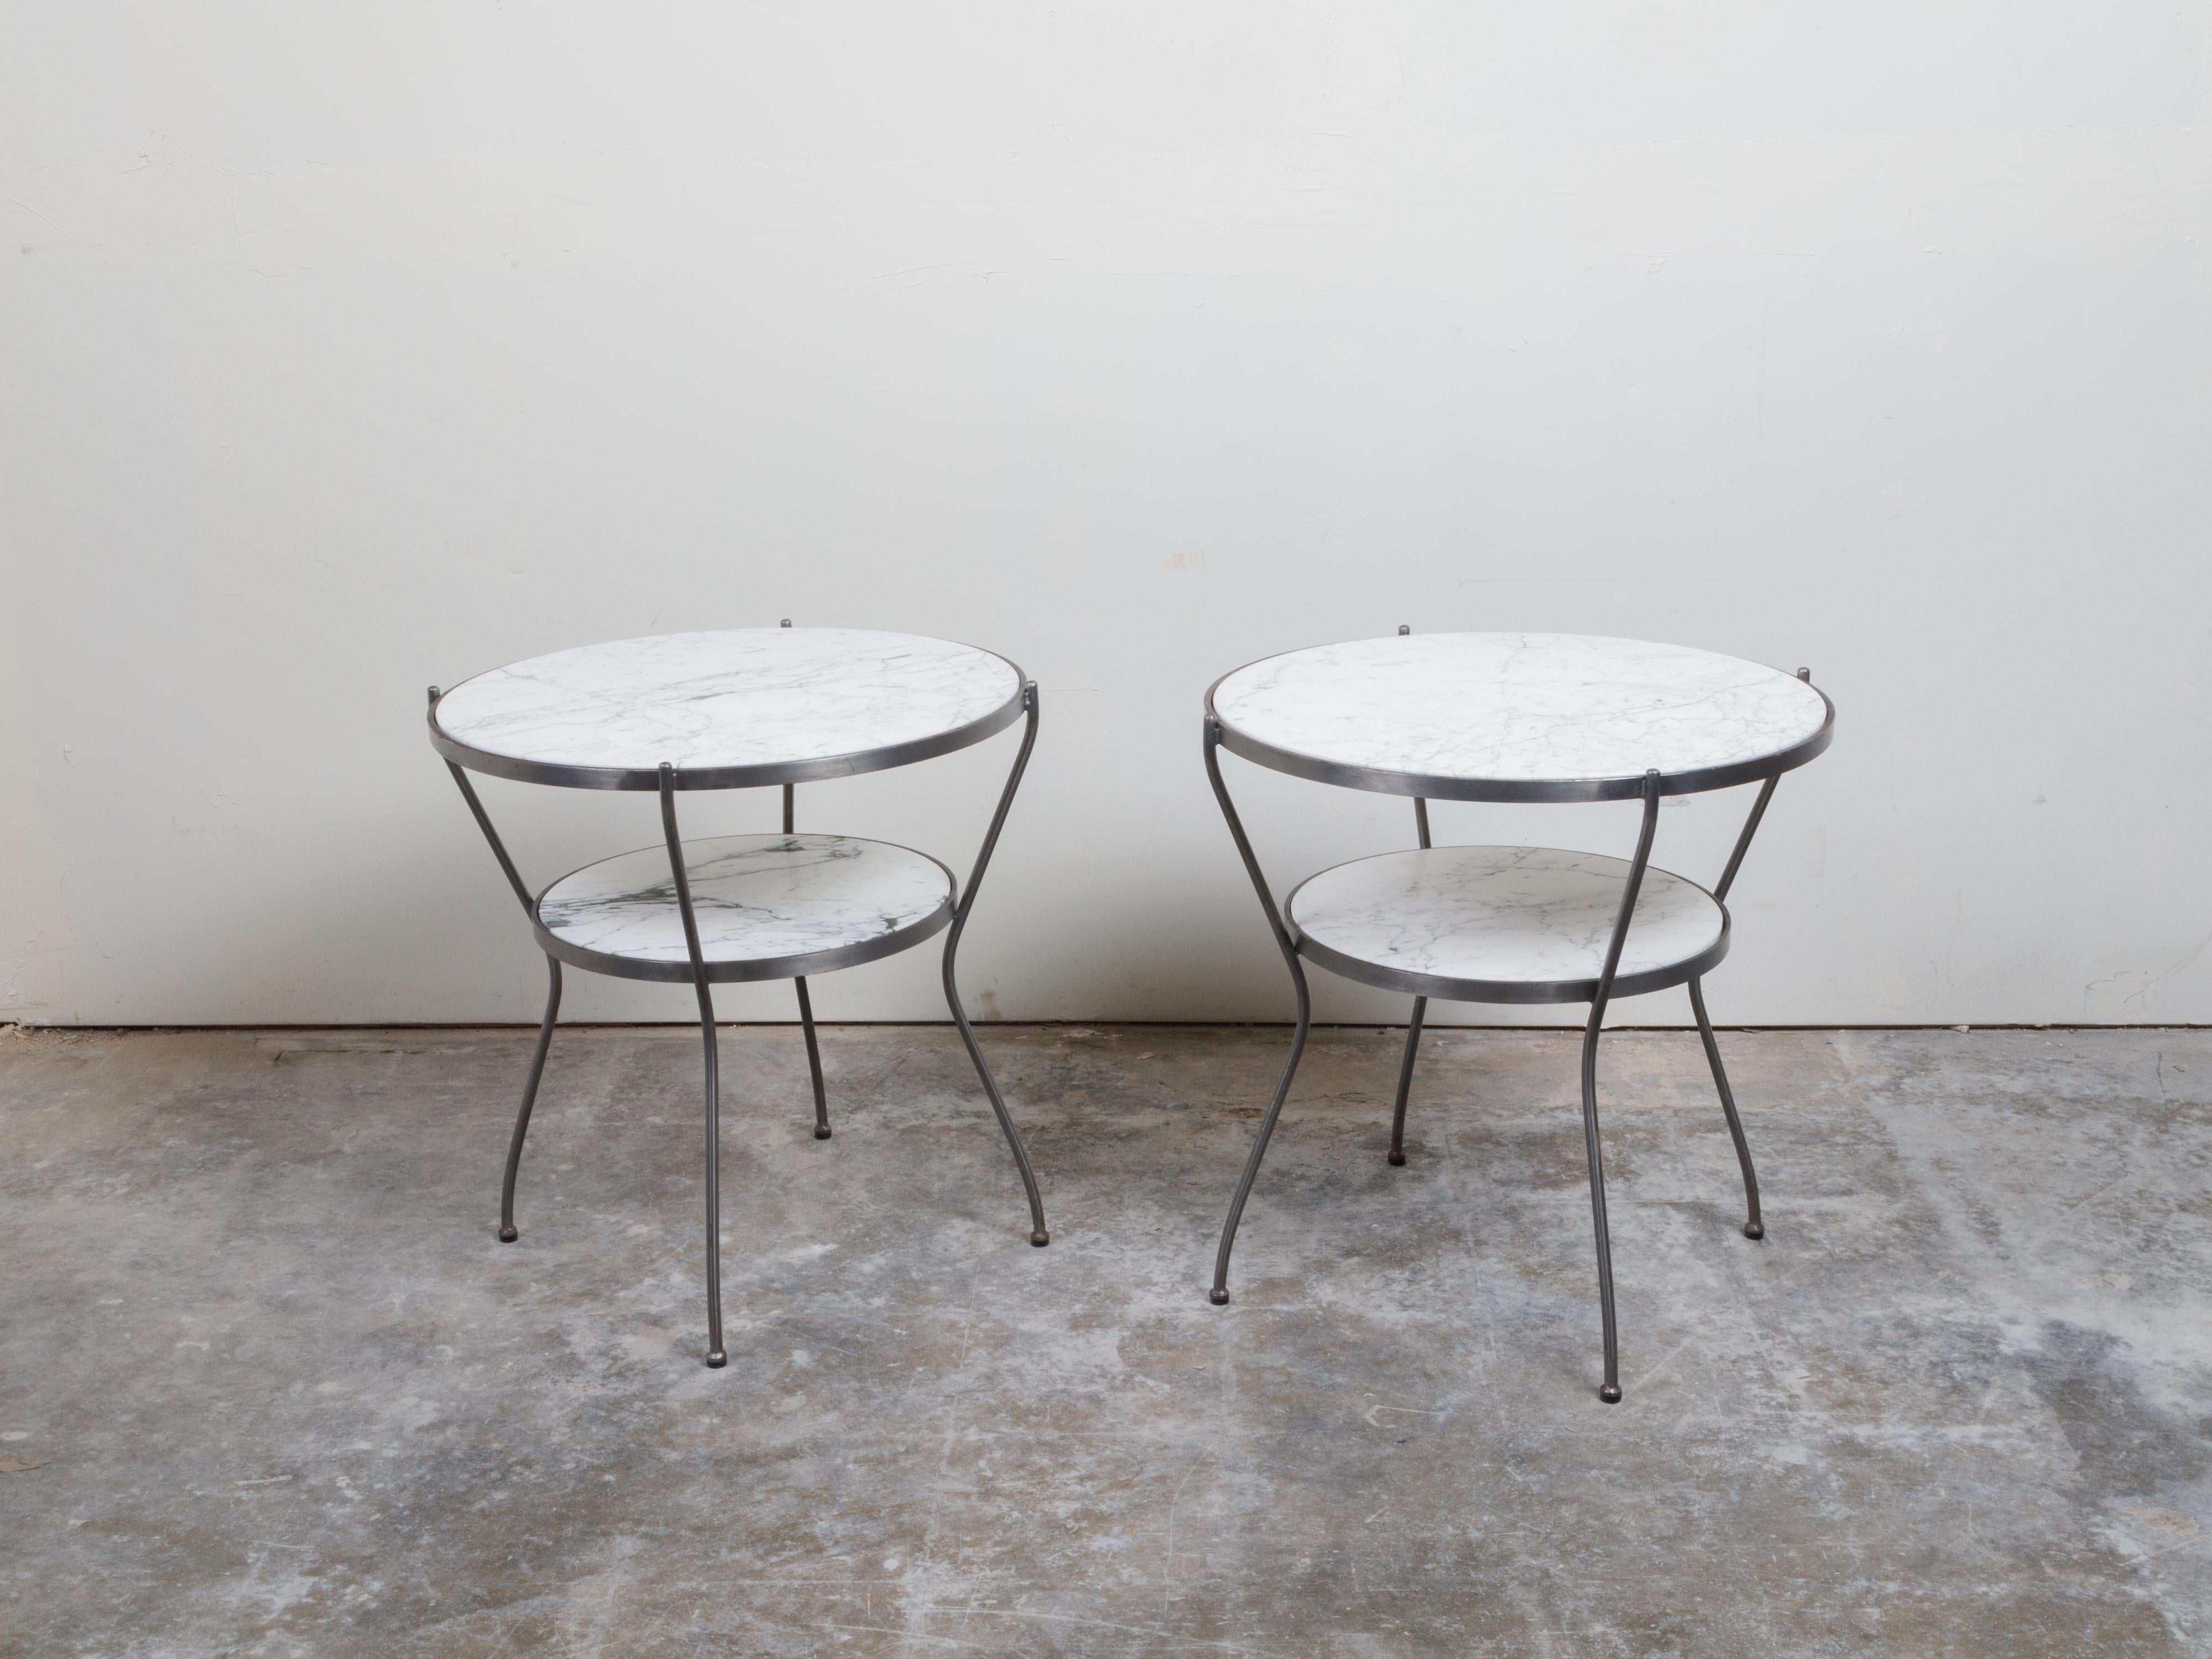 A pair of Italian steel side tables from the mid 20th century, with marble tops and shelves. Created in Italy during the midcentury period, each of this pair of side tables features a circular white veined marble top sitting above a smaller shelf of